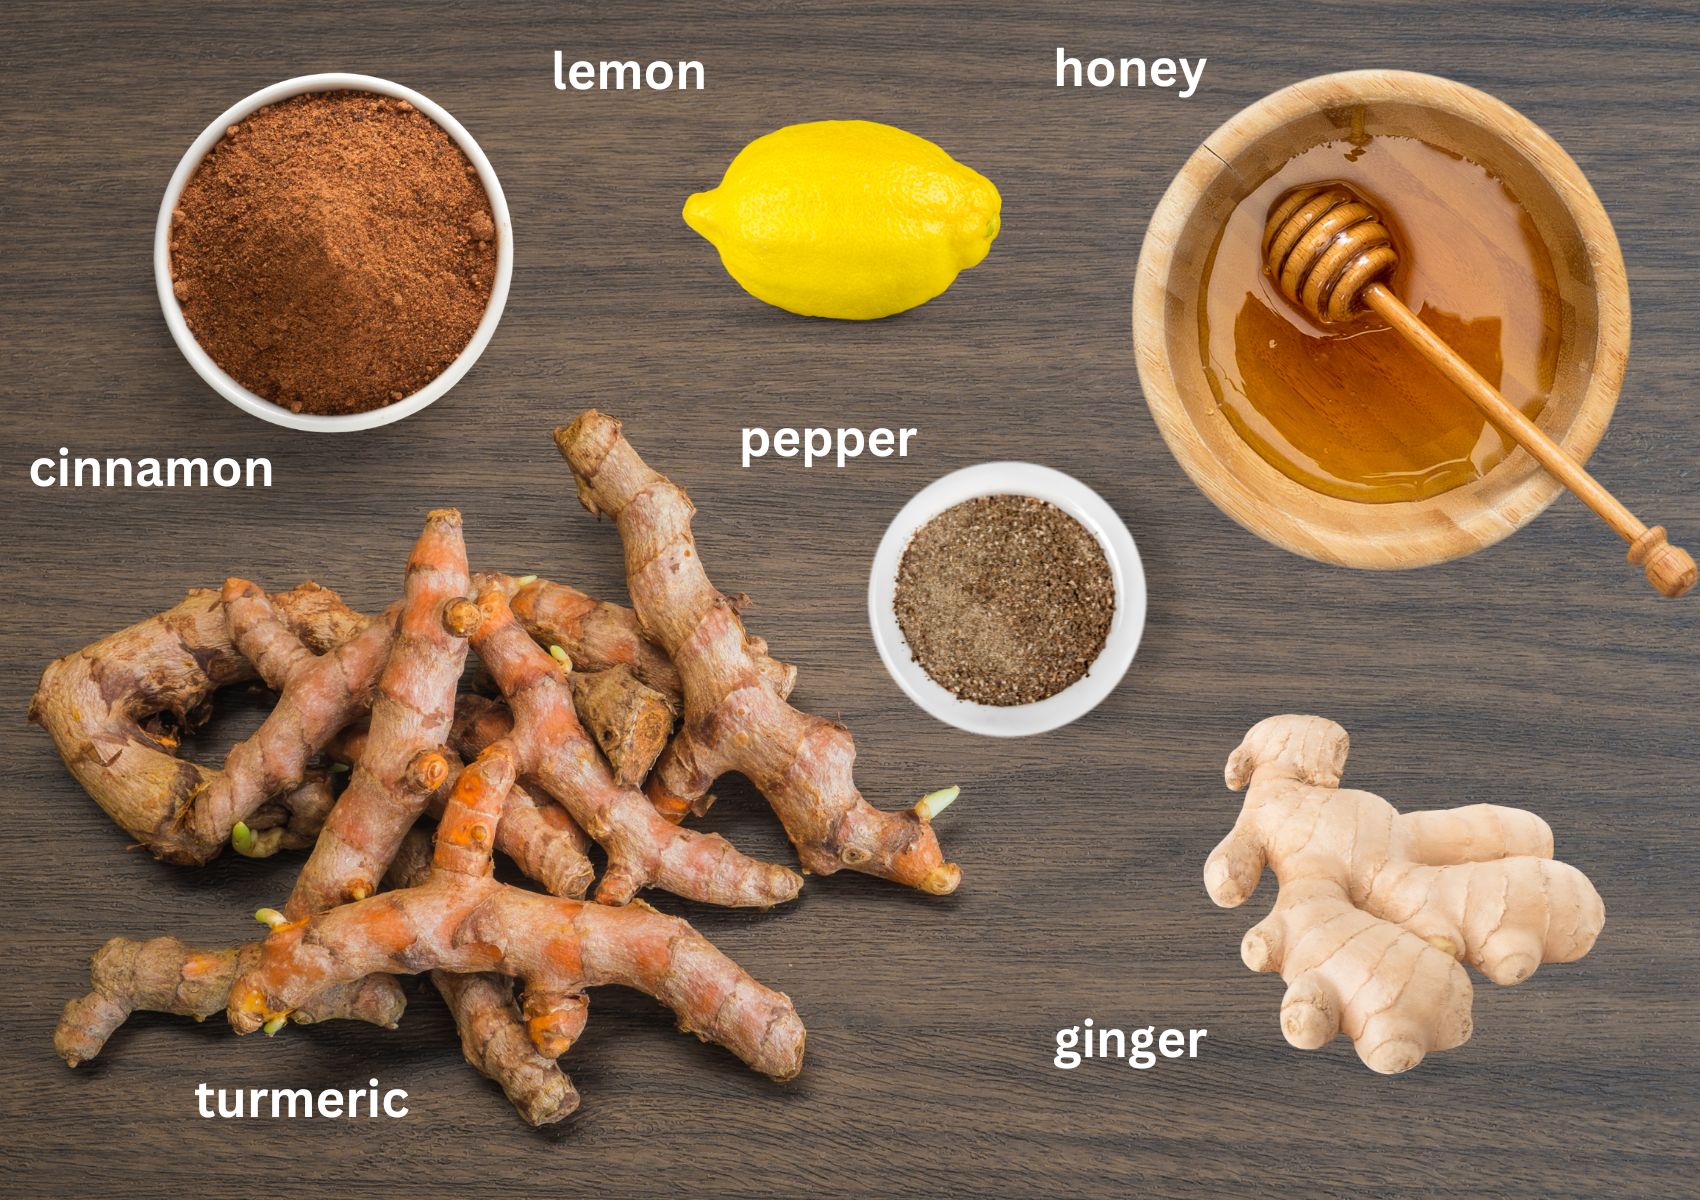 labeled ingredients for making turmeric tea with ginger, cinnamon, lemon, pepper, and honey.